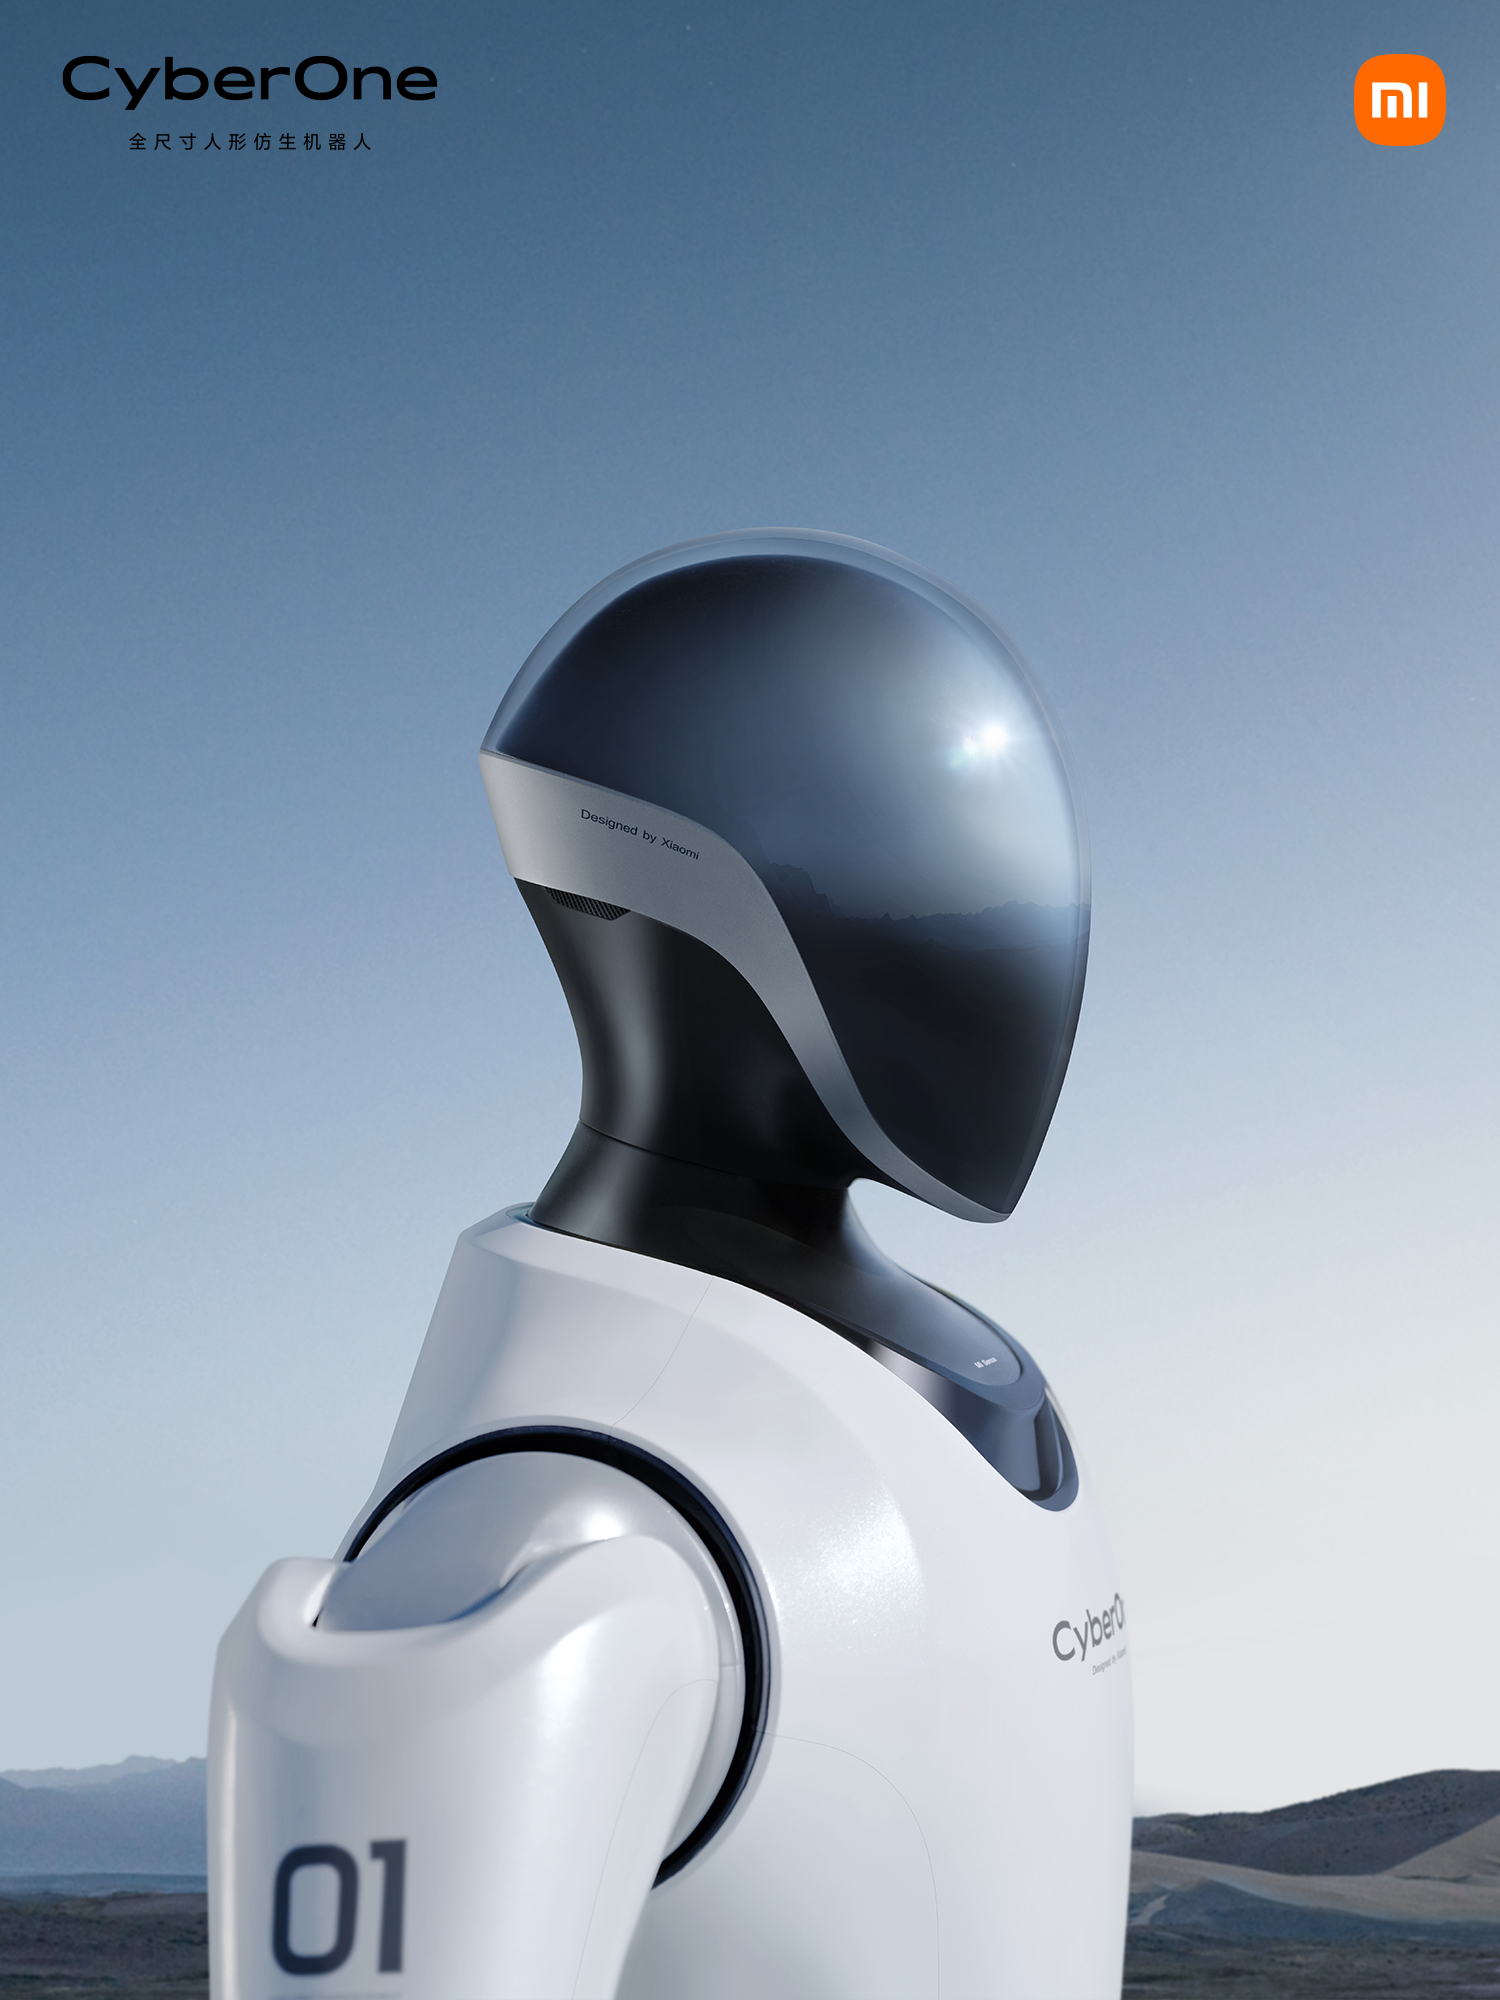 Xiaomi unveiled its first full-size humanoid robot, CyberOne - Gizmochina